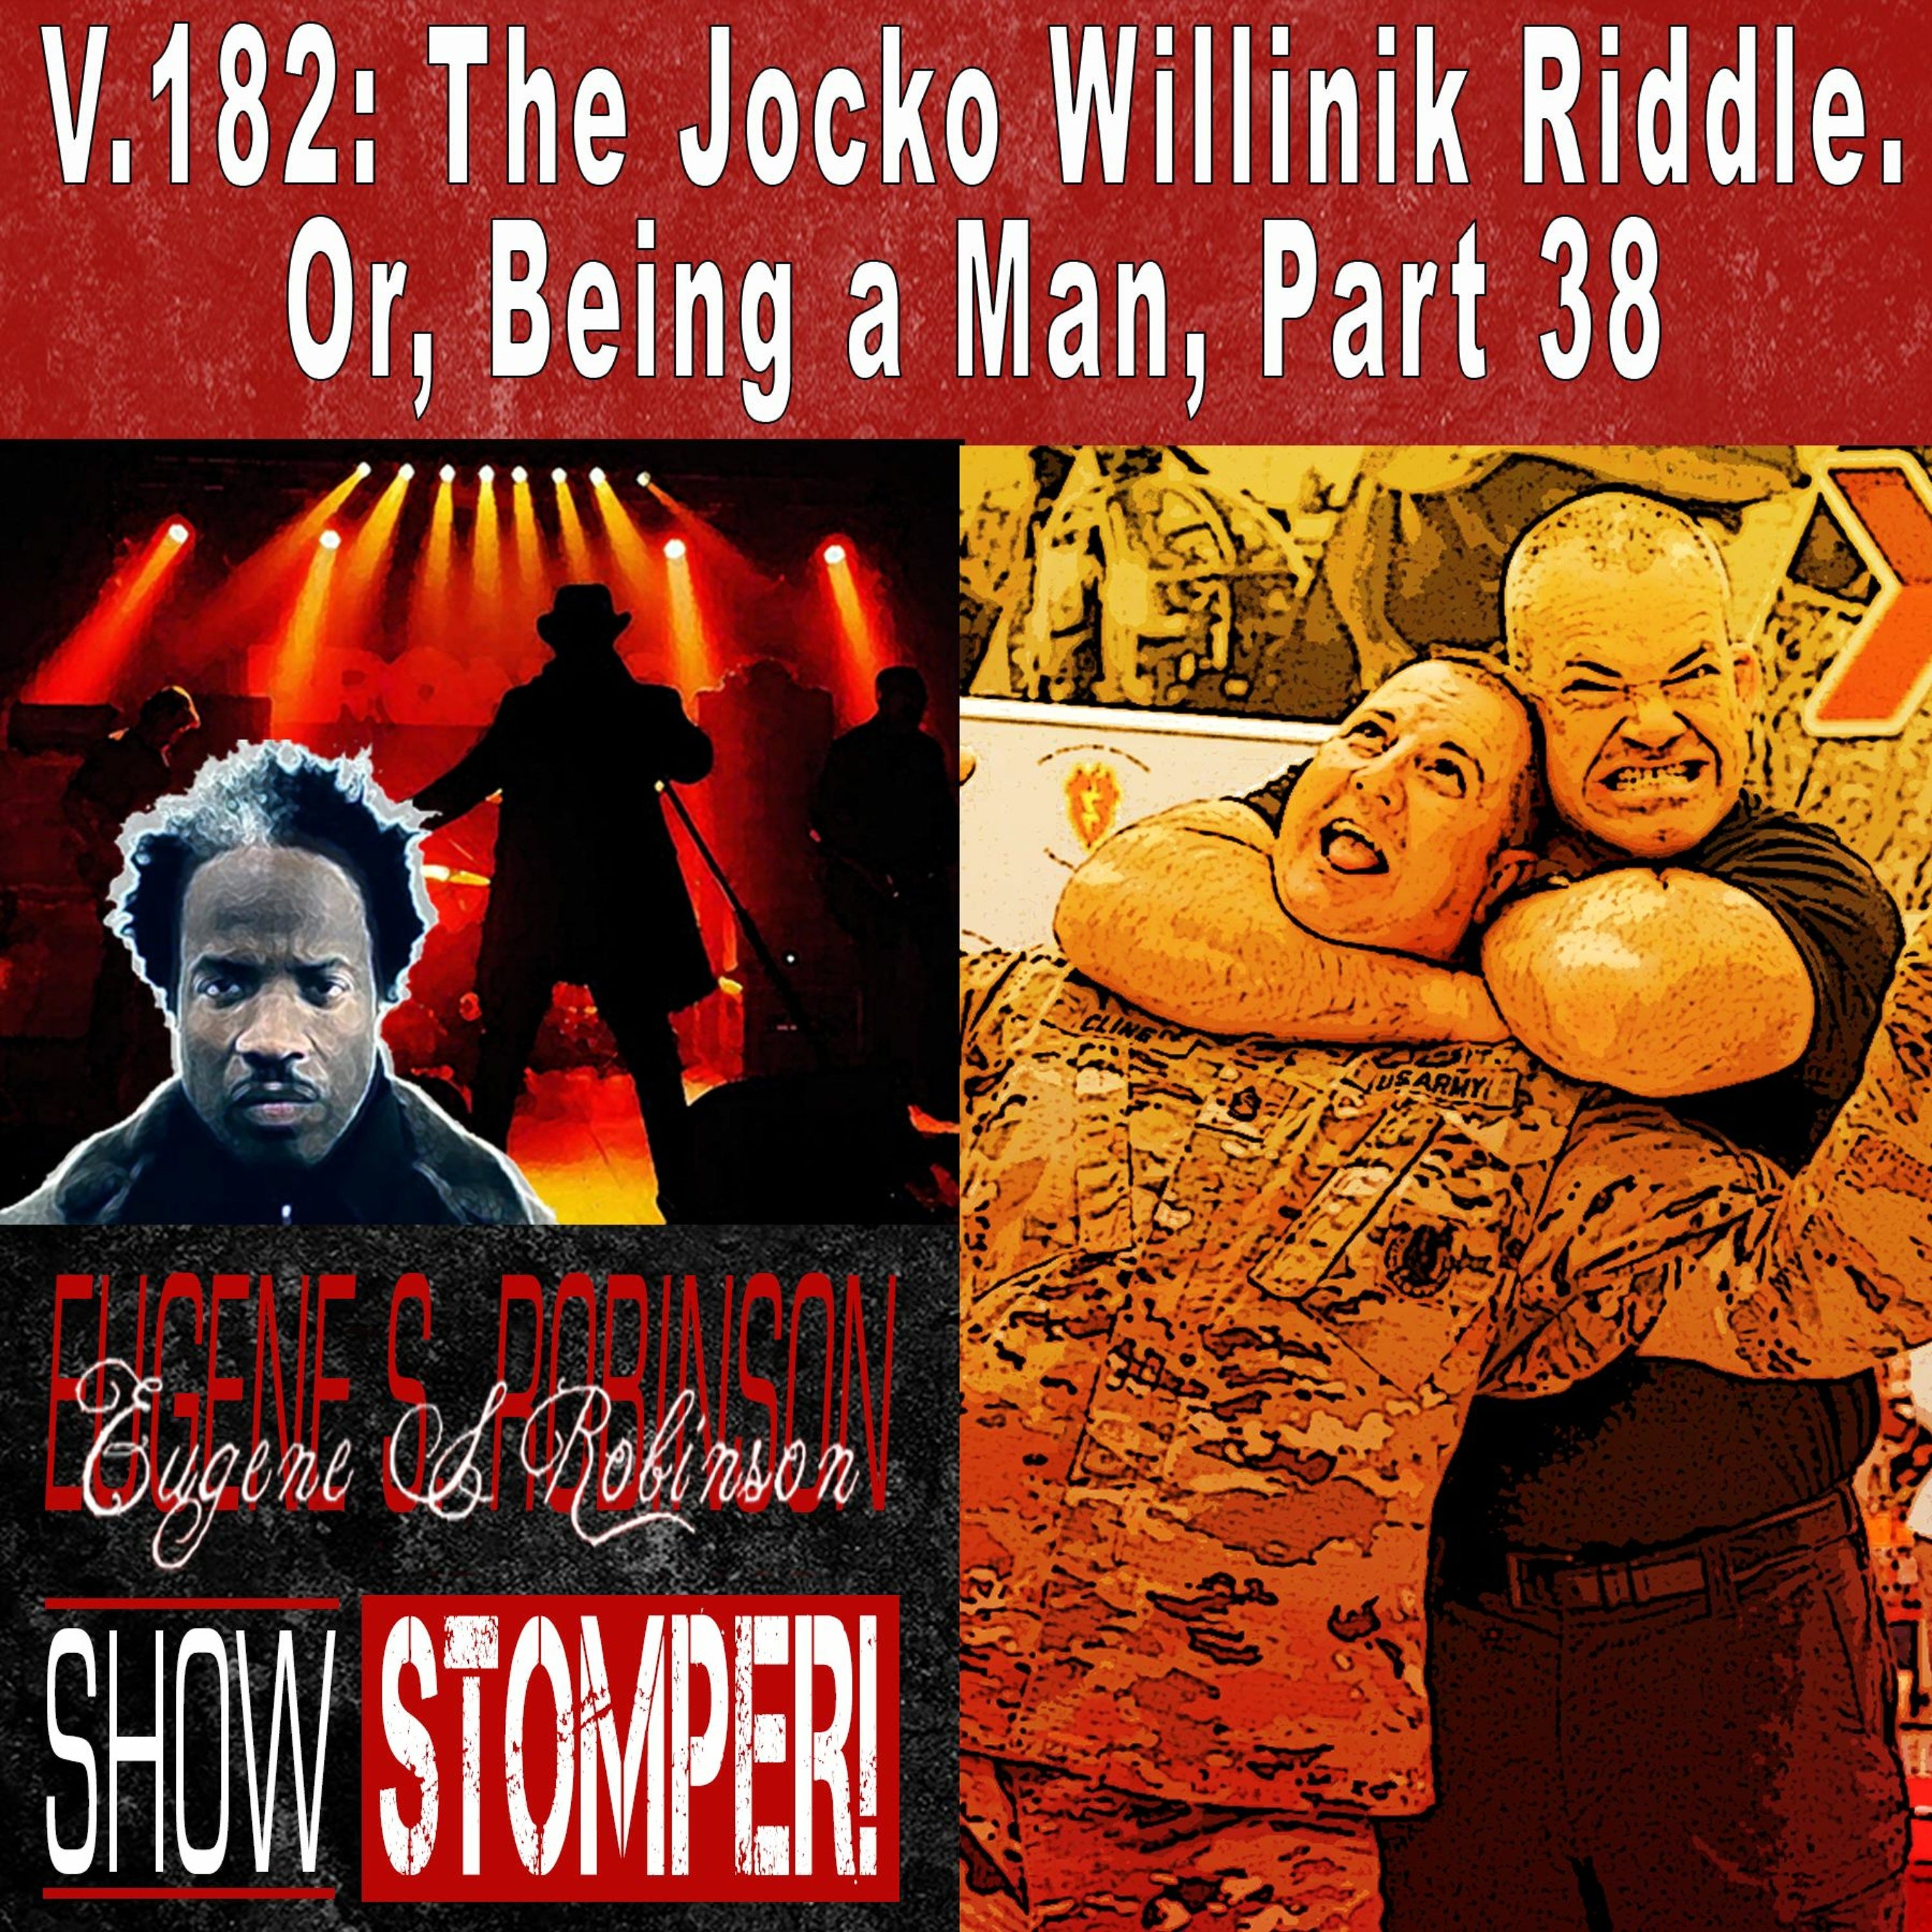 V.182: The Jocko Willinik Riddle. Or, Being a Man, Part 38 On The Eugene S. Robinson Show Stomper!